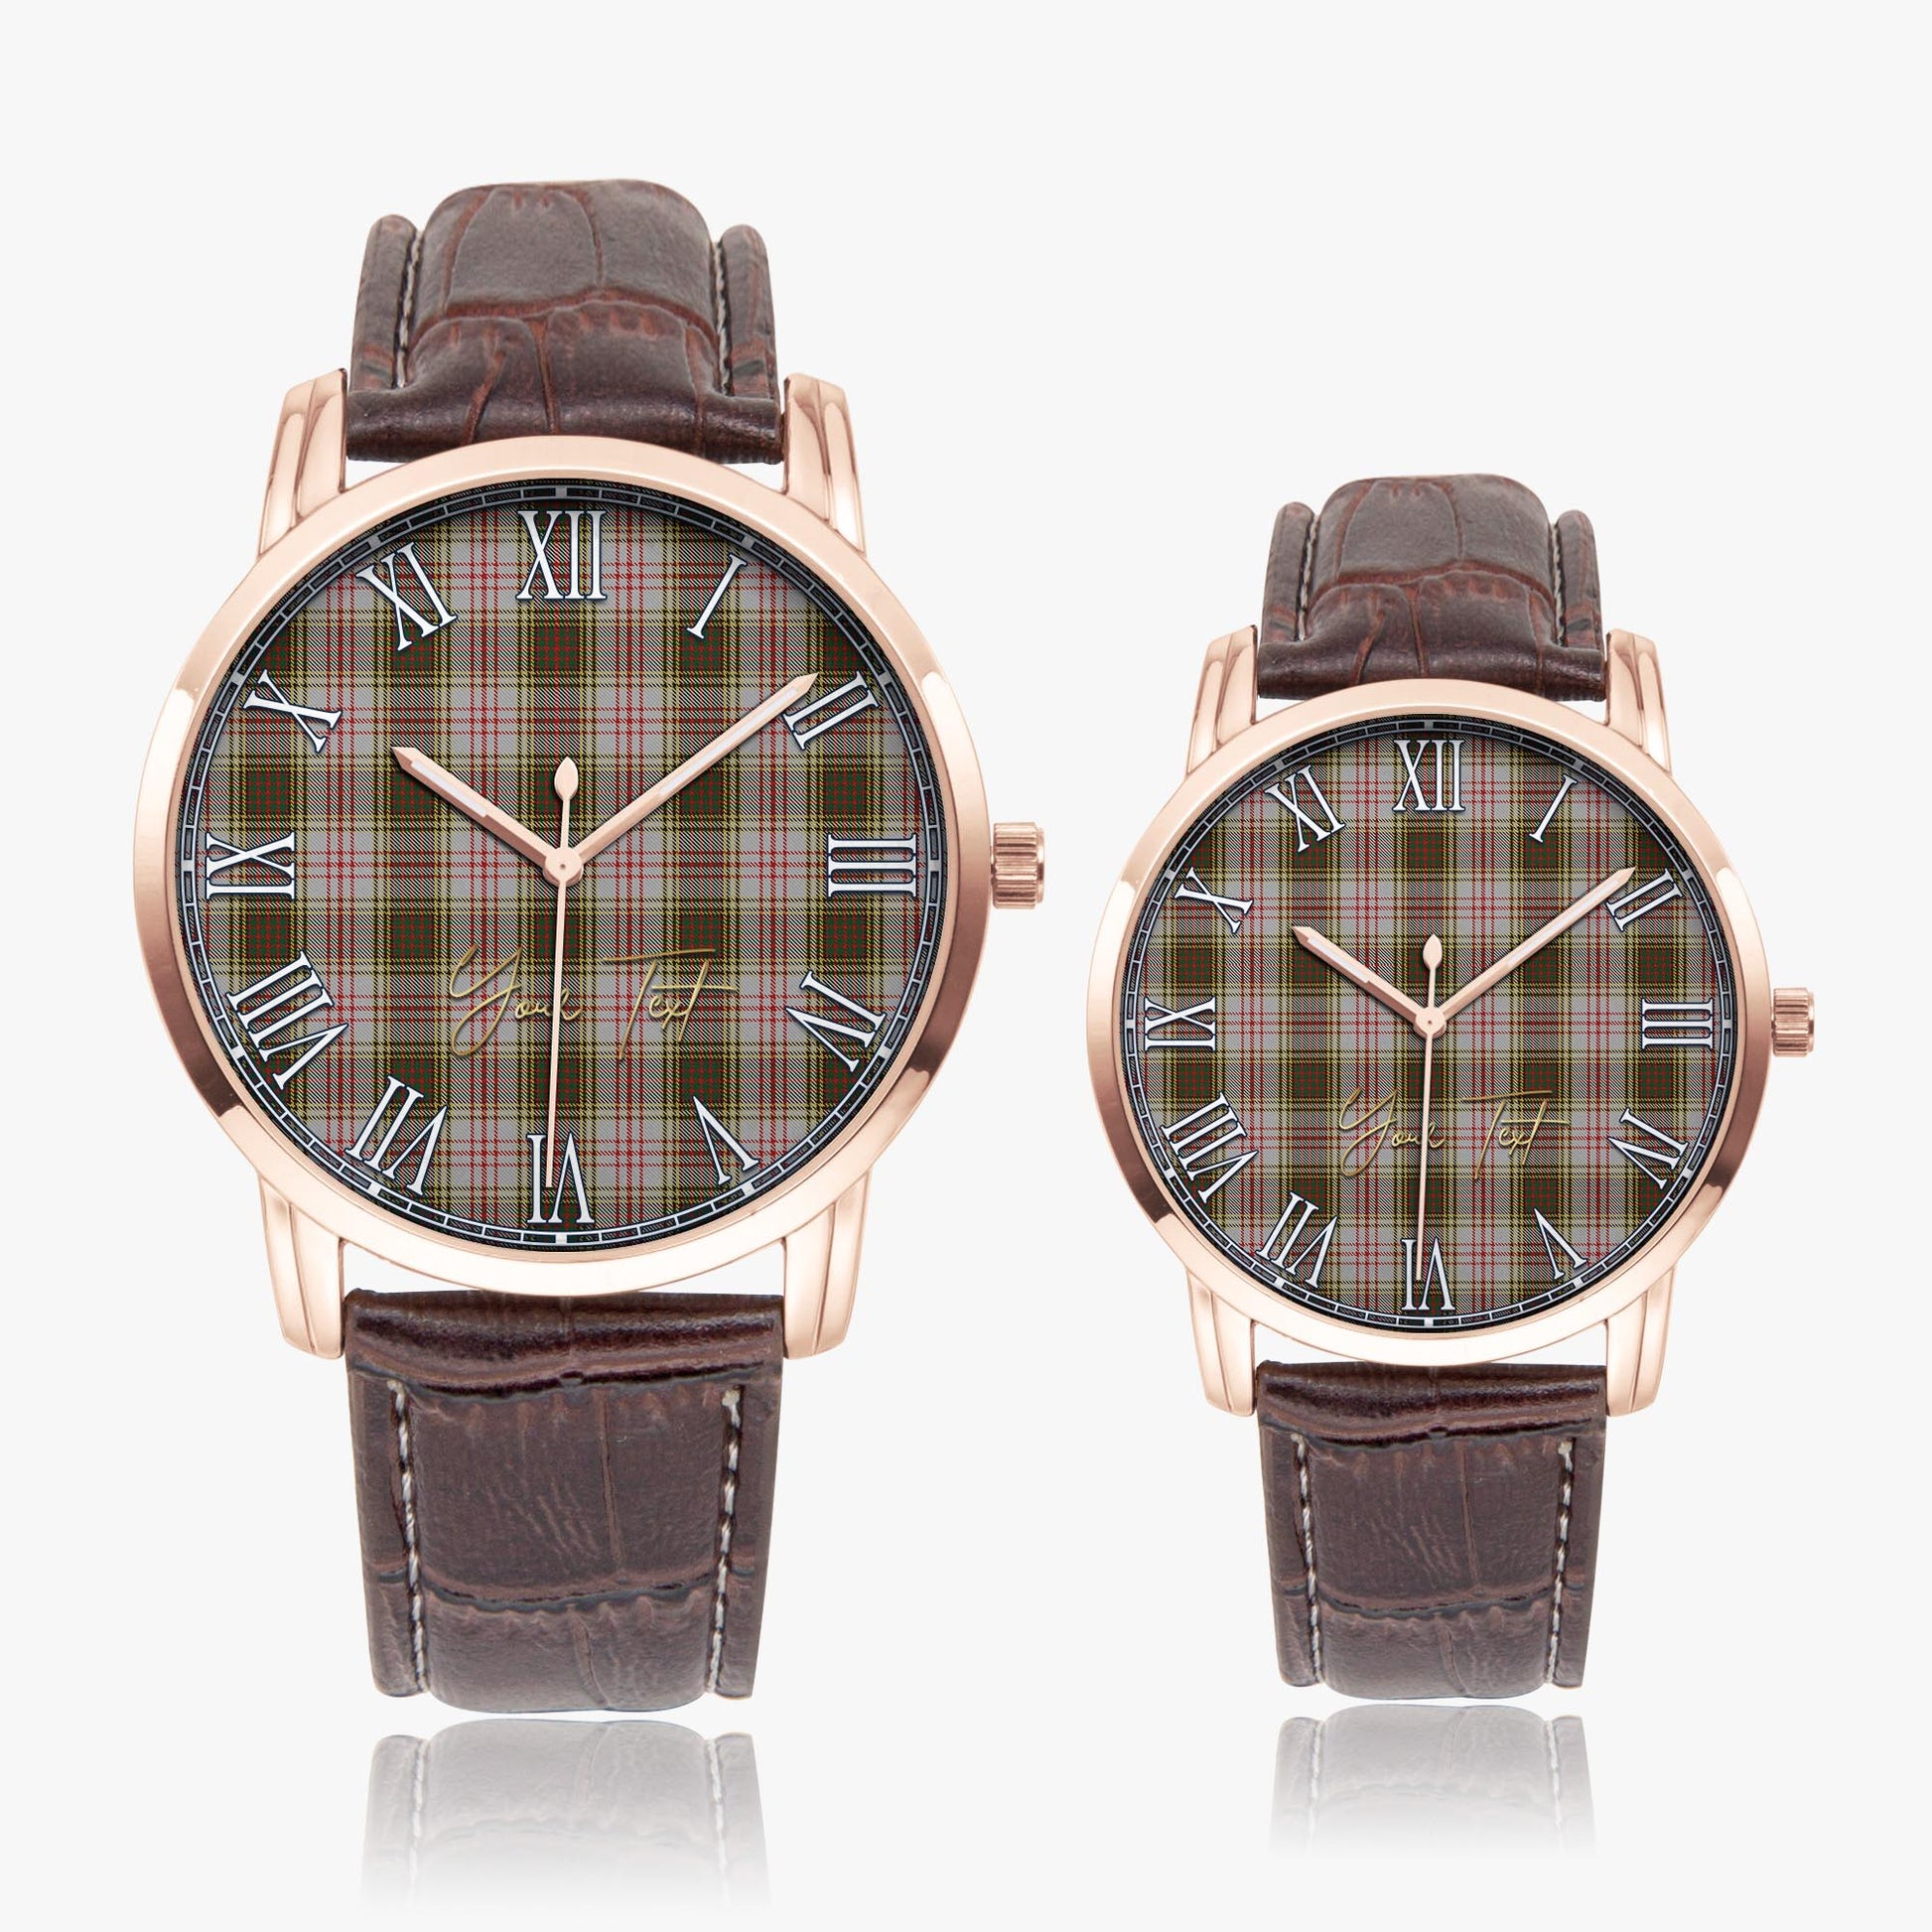 Anderson Dress Tartan Personalized Your Text Leather Trap Quartz Watch Wide Type Rose Gold Case With Brown Leather Strap - Tartanvibesclothing